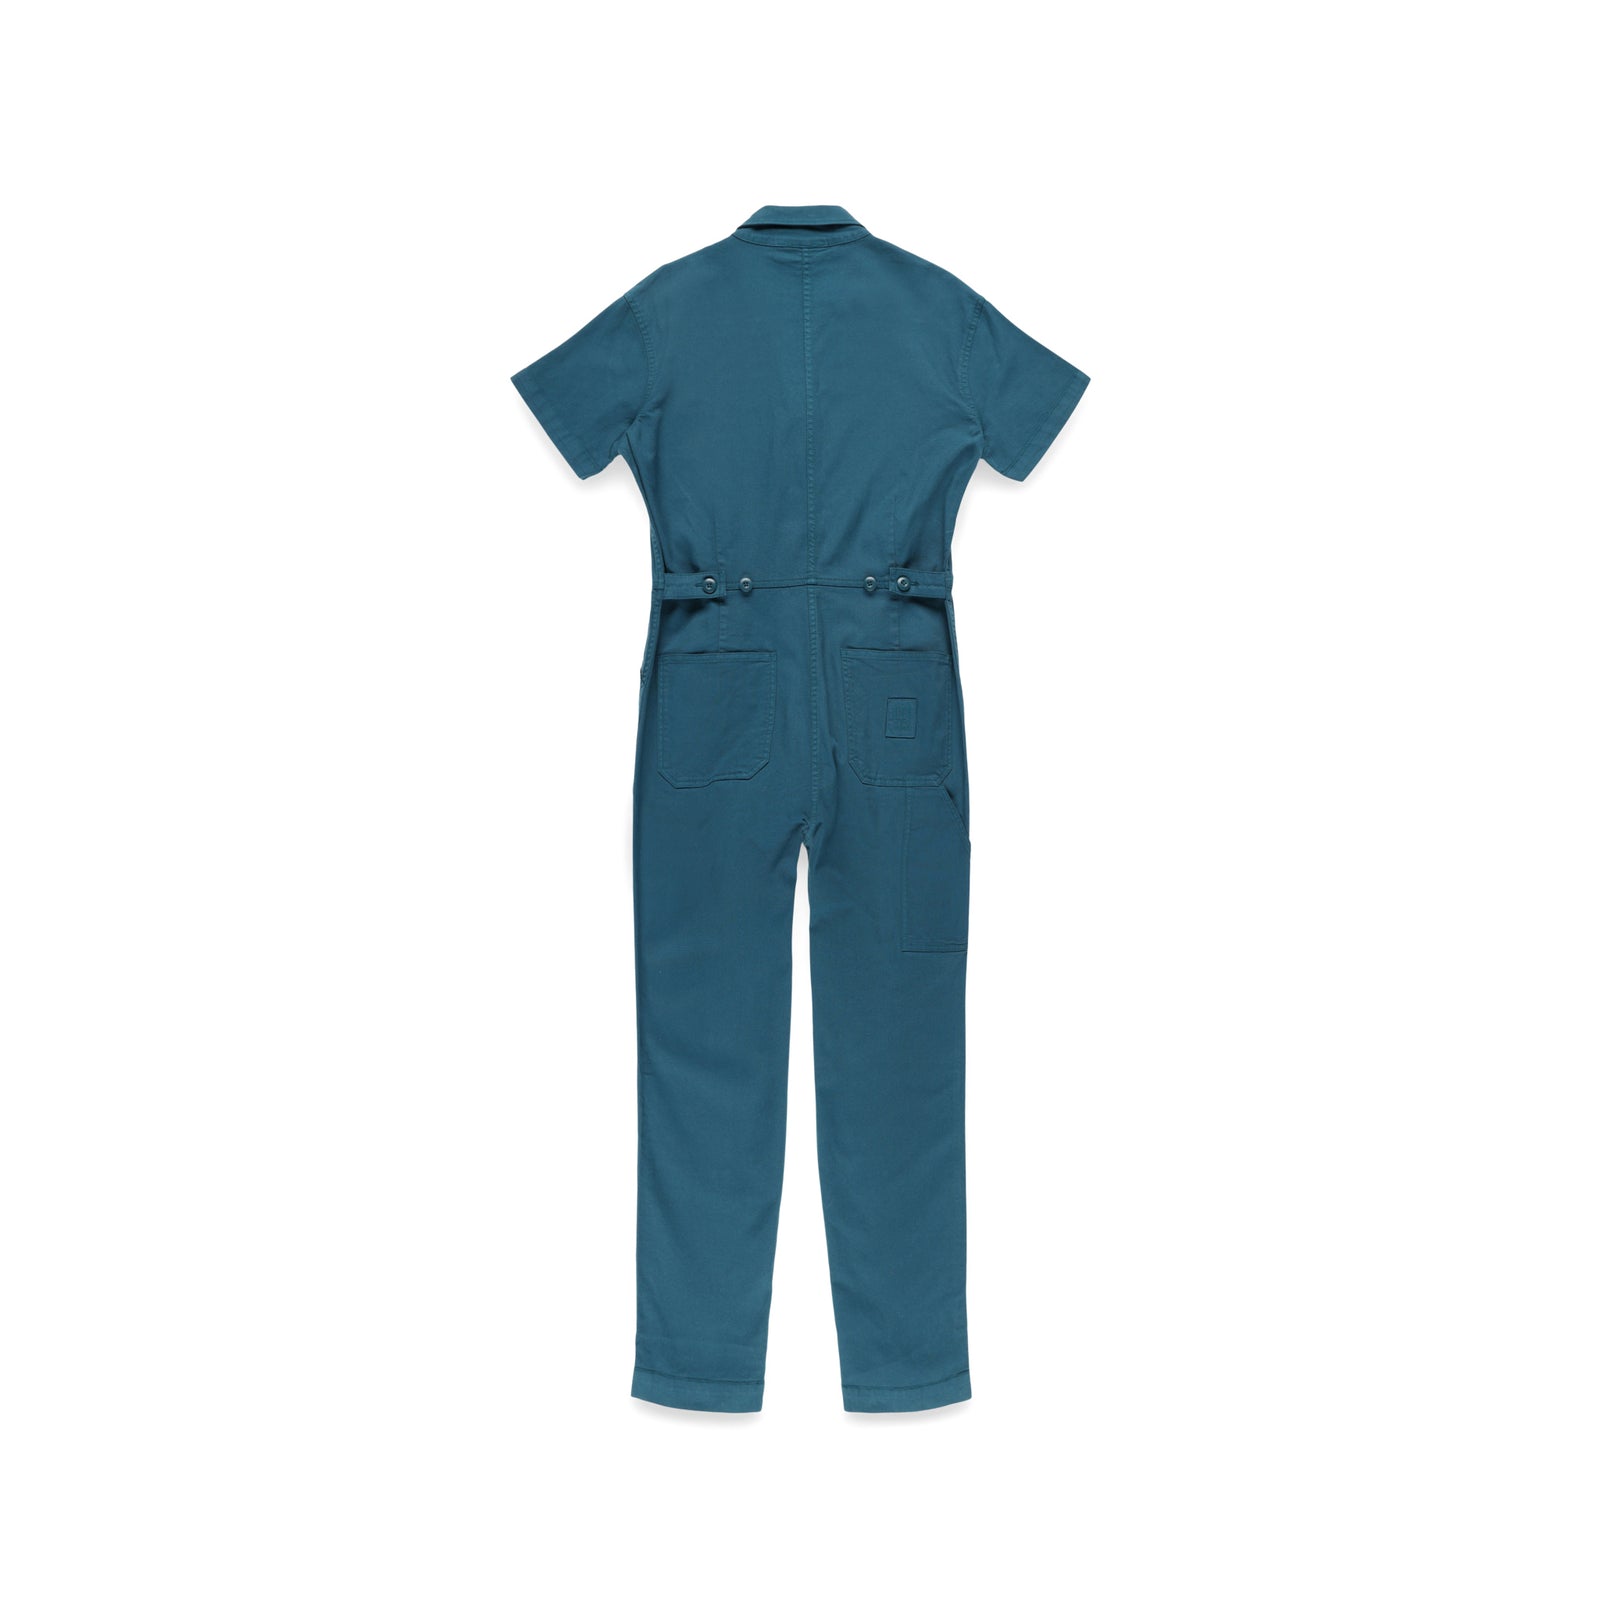 Back of Topo Designs Women's Dirt Coverall 100% organic cotton short sleeve jumpsuit in "pond blue"